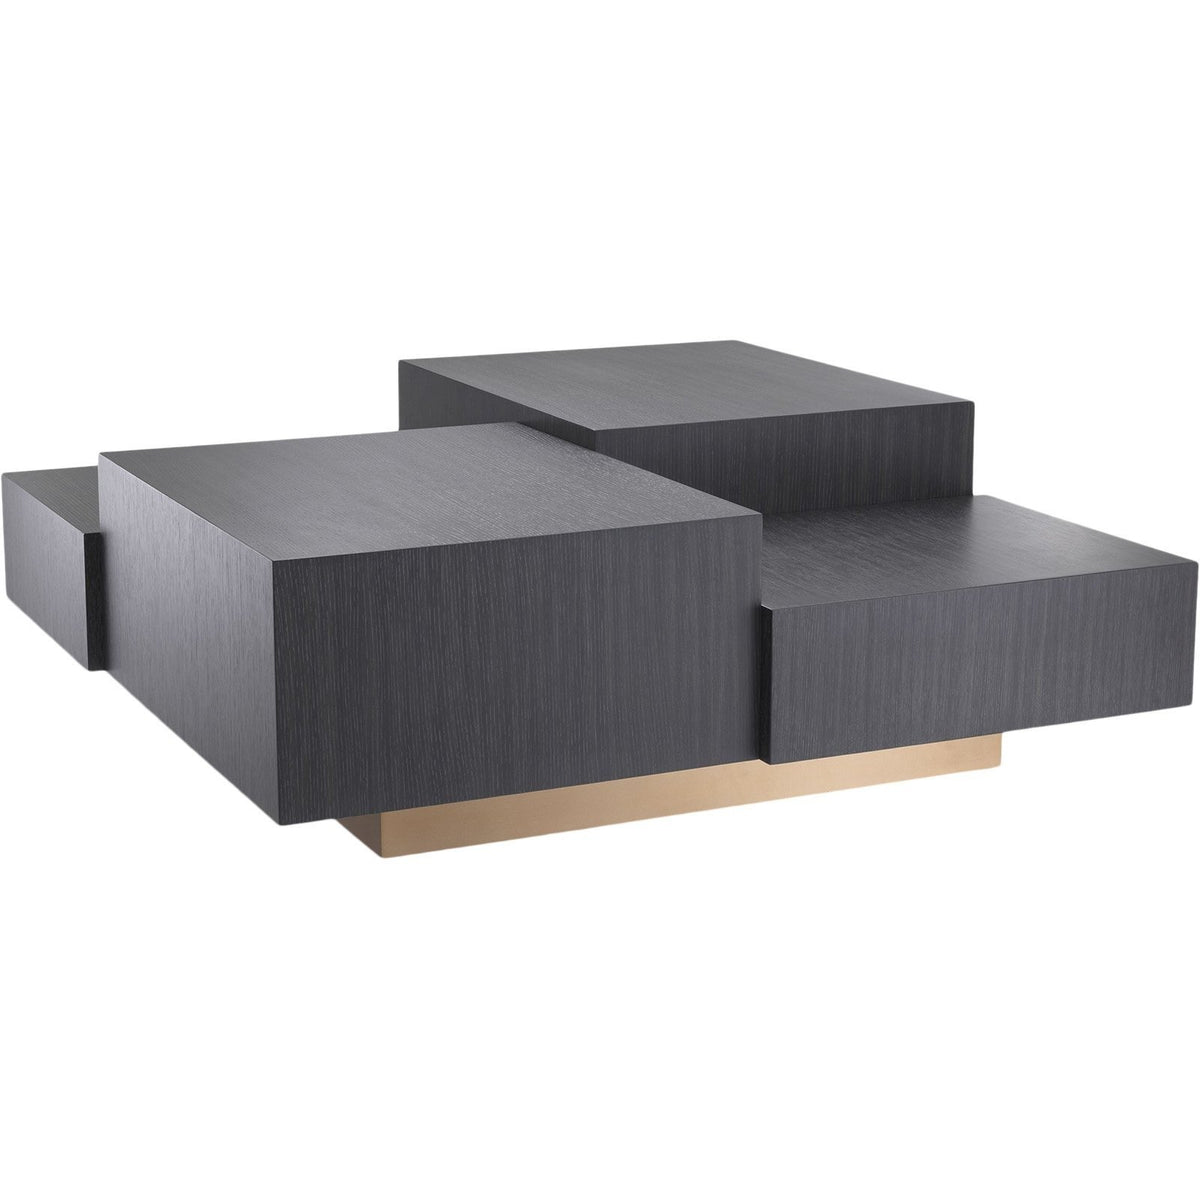 Nerone Coffee Table, Charcoal